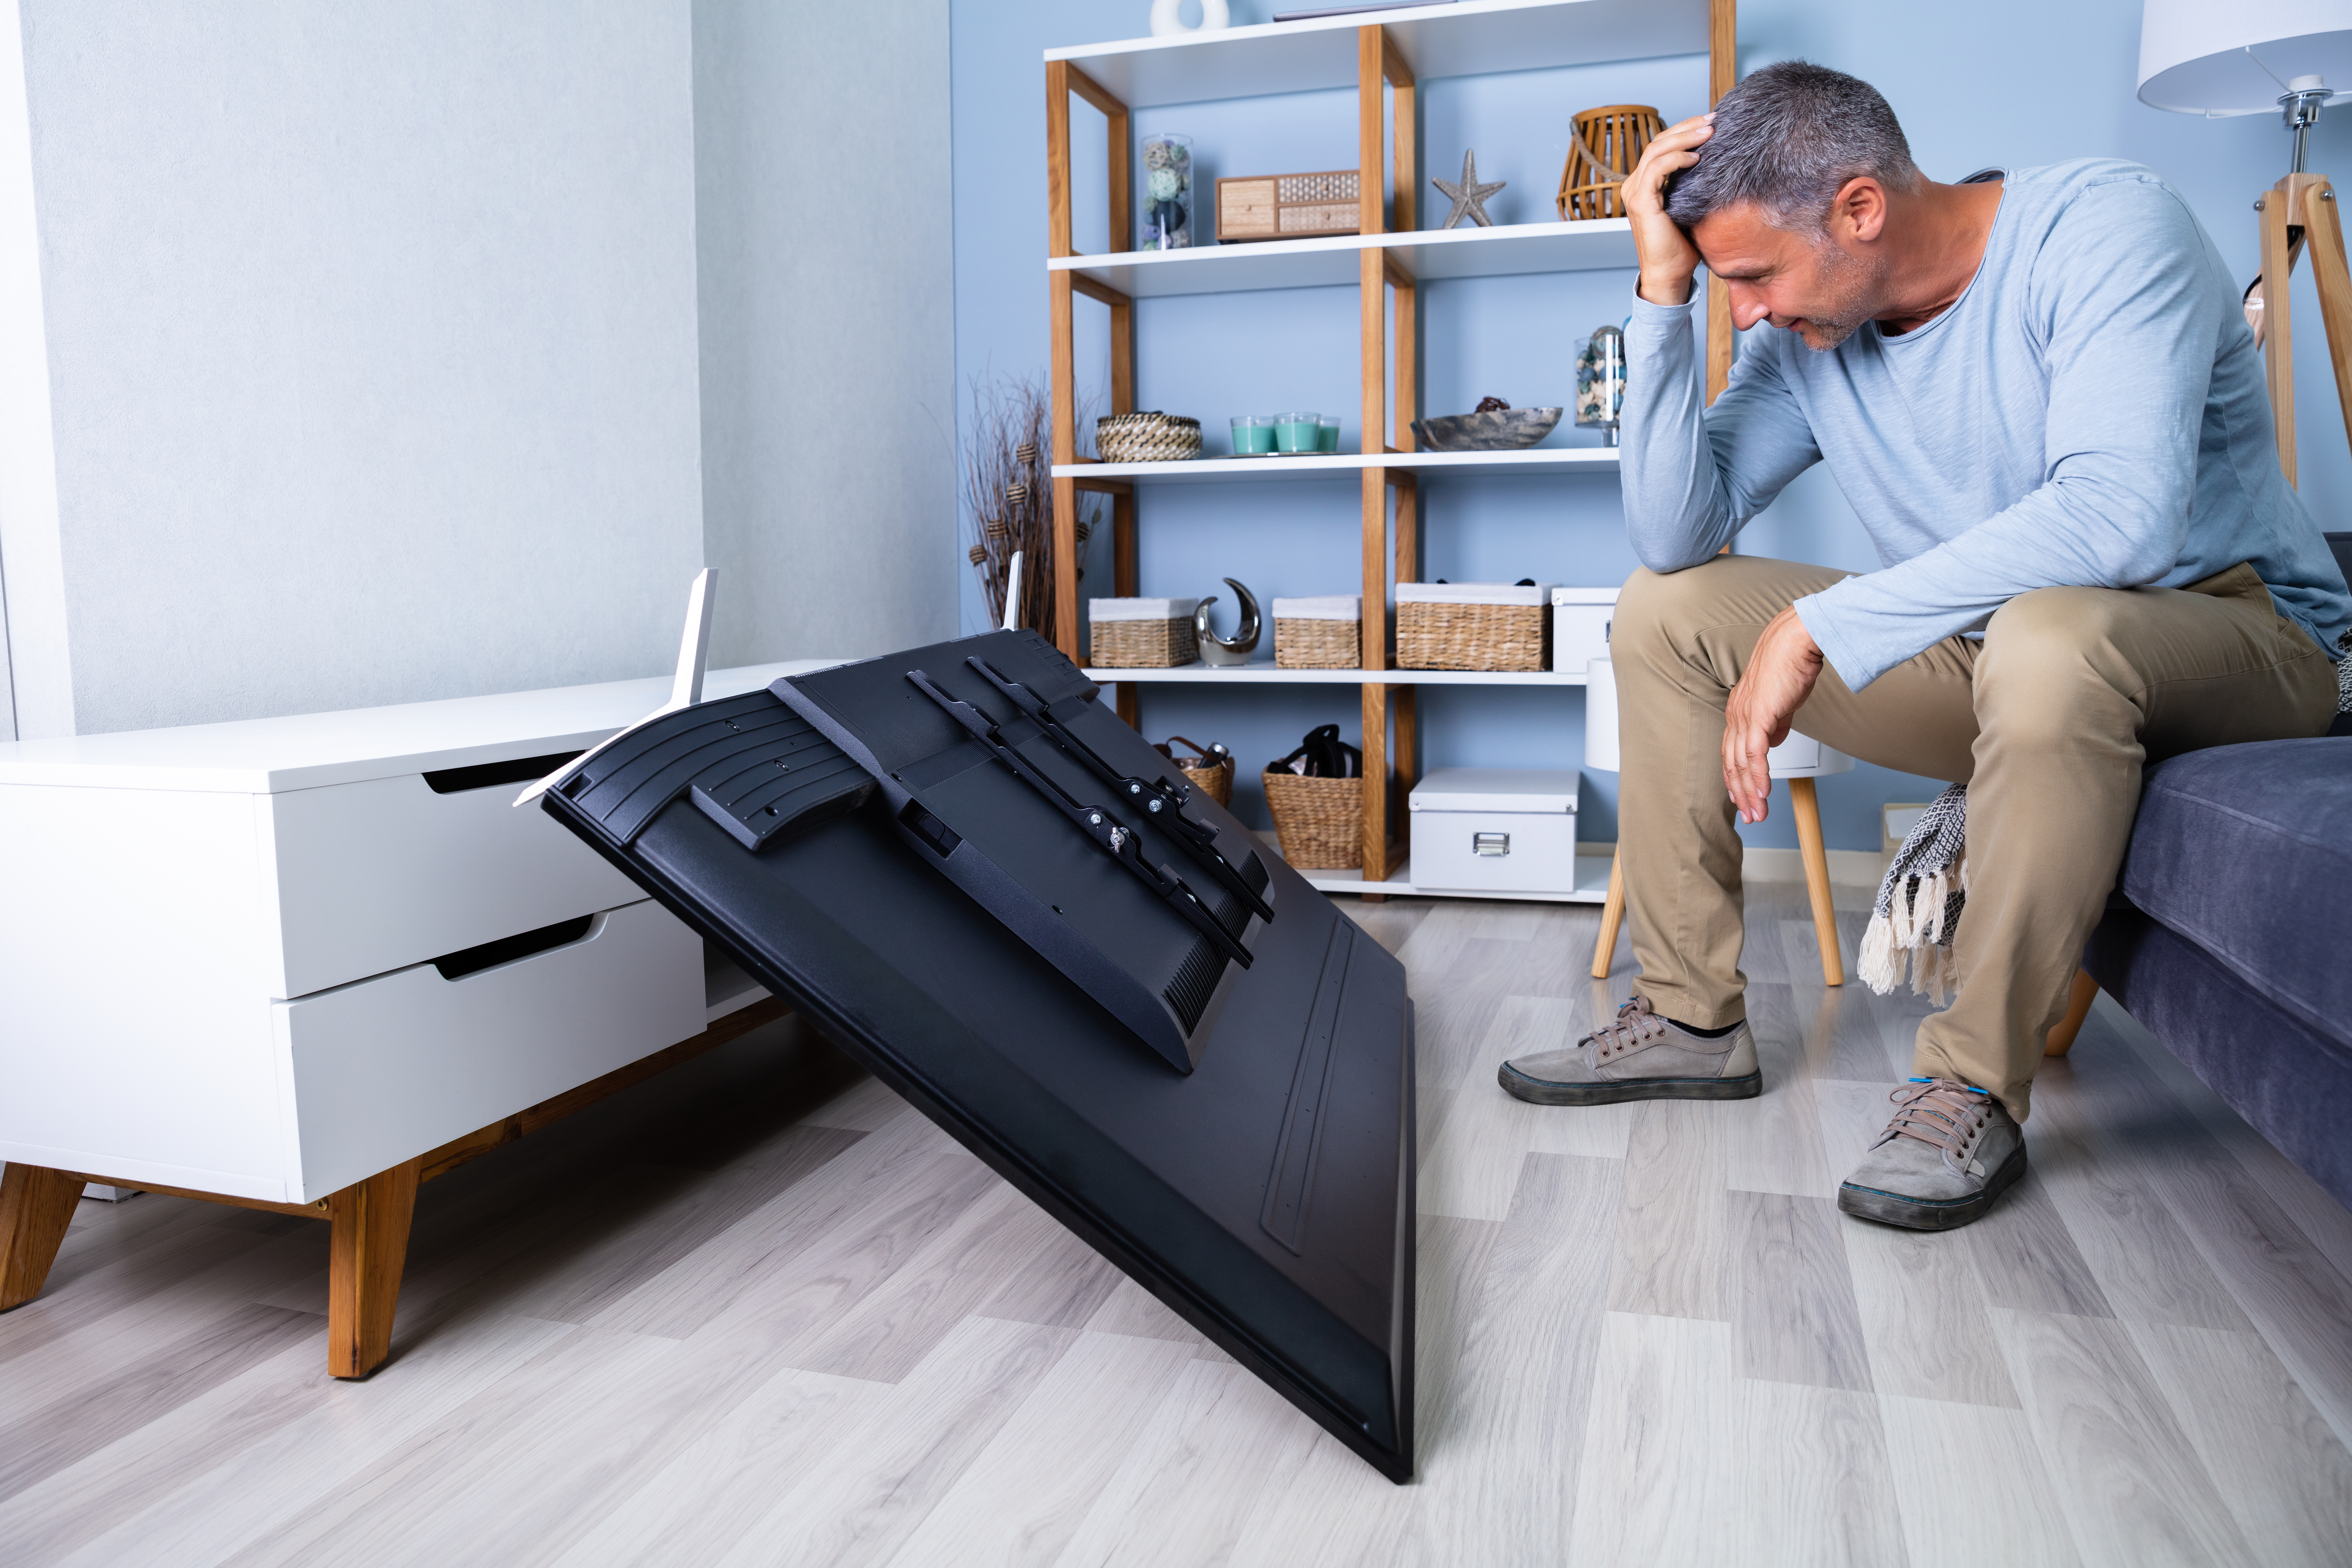 Man with head in his hands looking at a TV that's fallen over